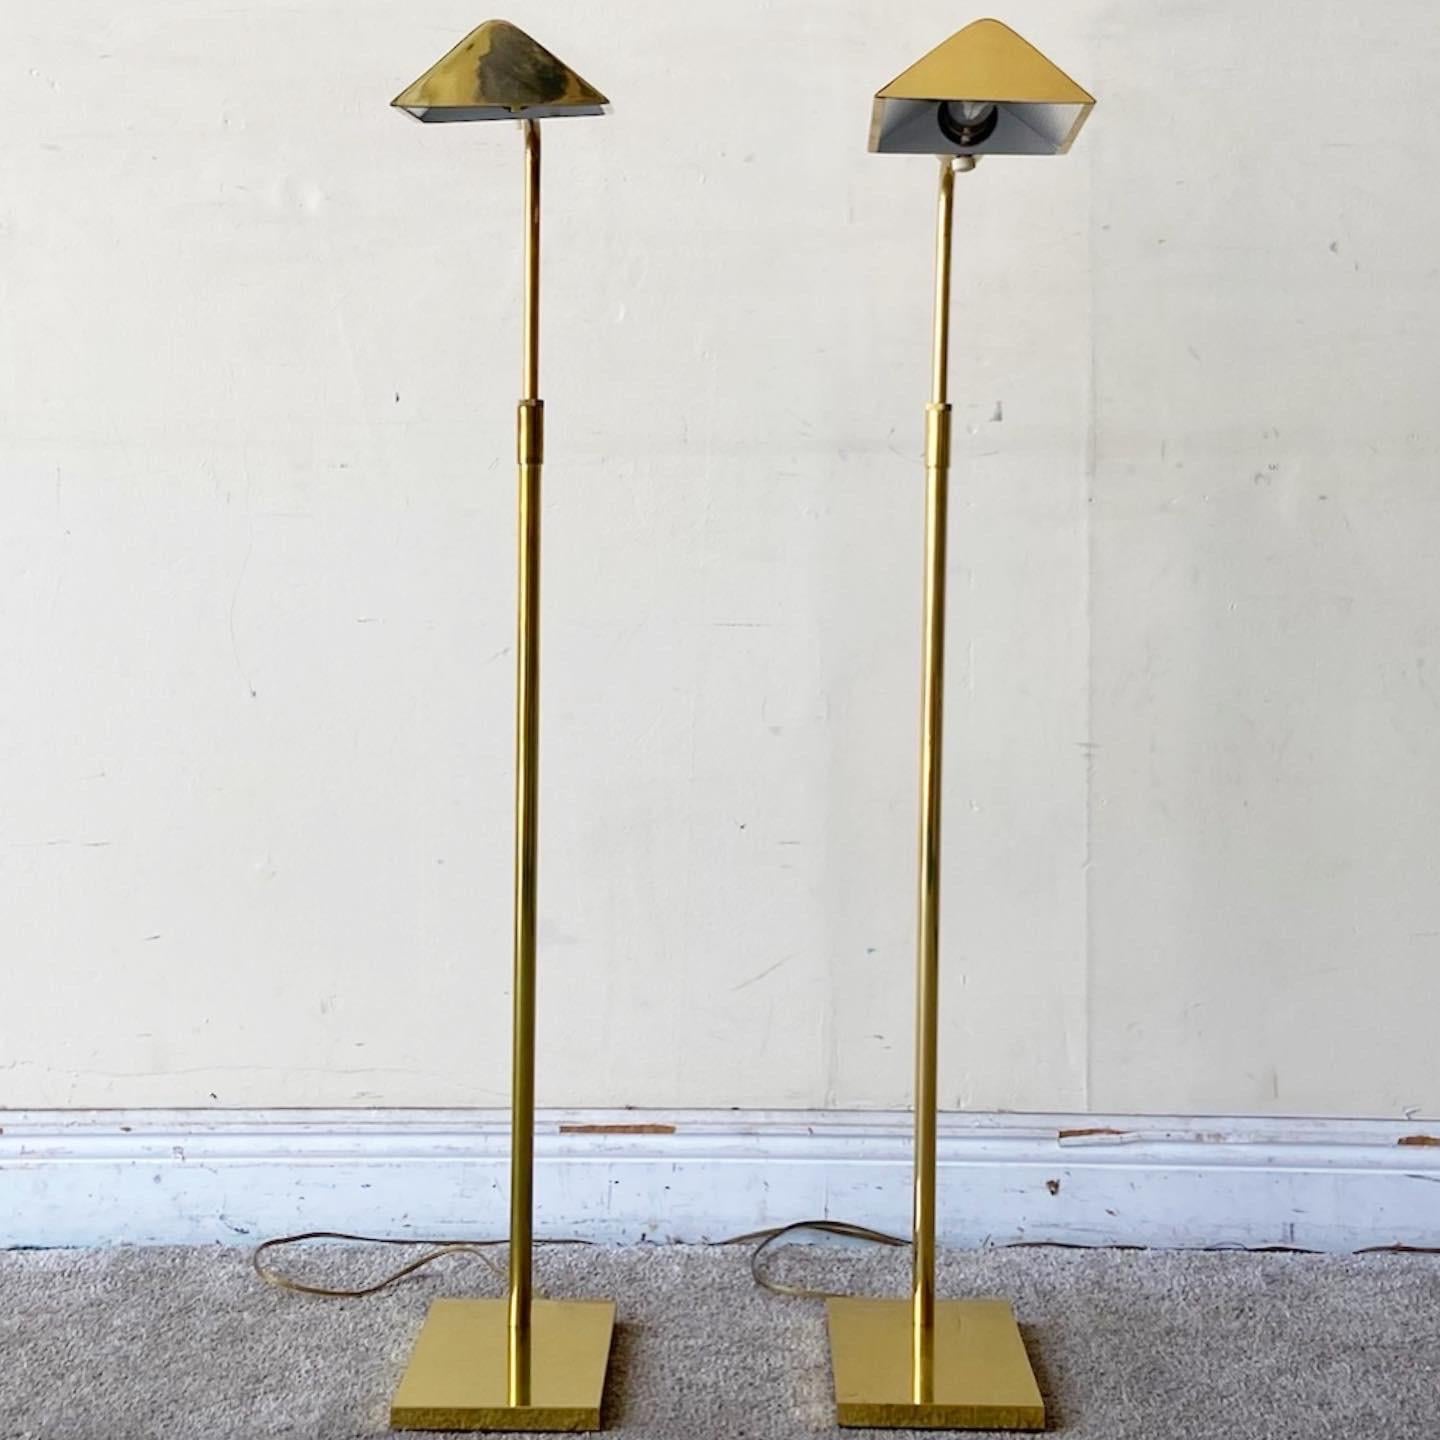 Incredible pair of mid Century Modern adjustable pharmacy lamps. Each features a folded finish with a rectangular base.
Extends from 35”H to 46”H